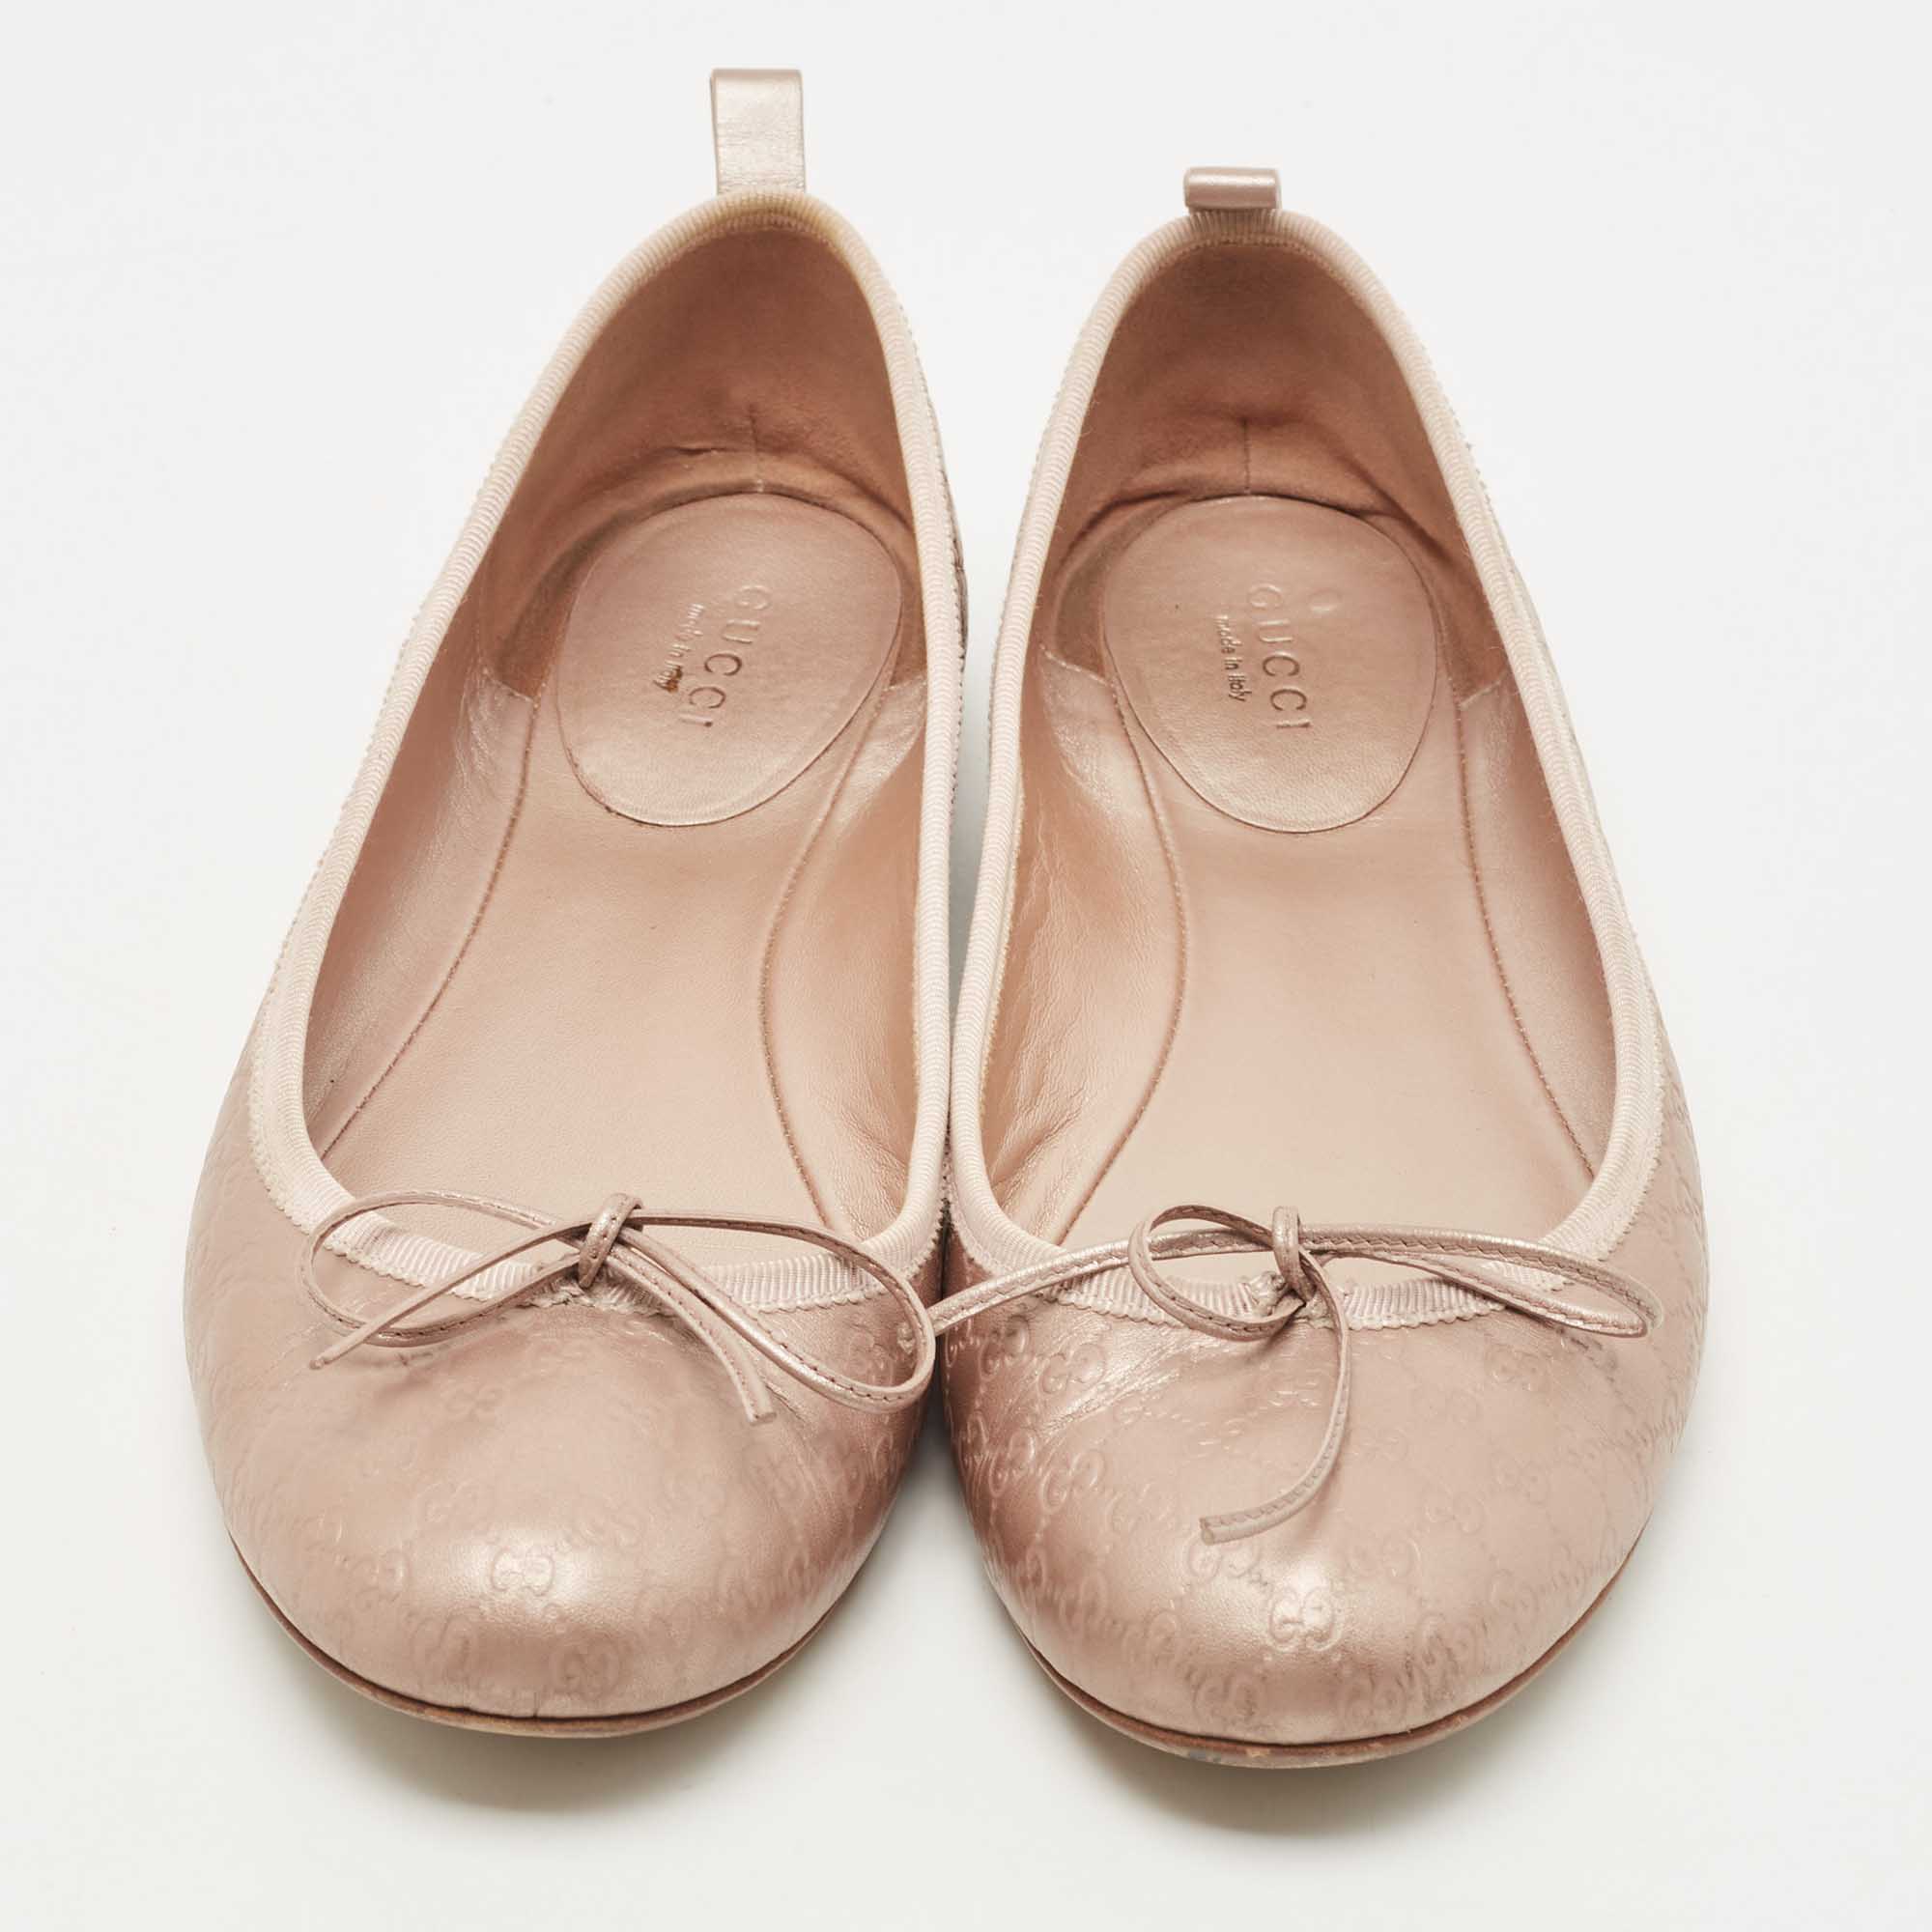 Gucci Metallic Guccissima Leather Bow Ballet Flats Size 38